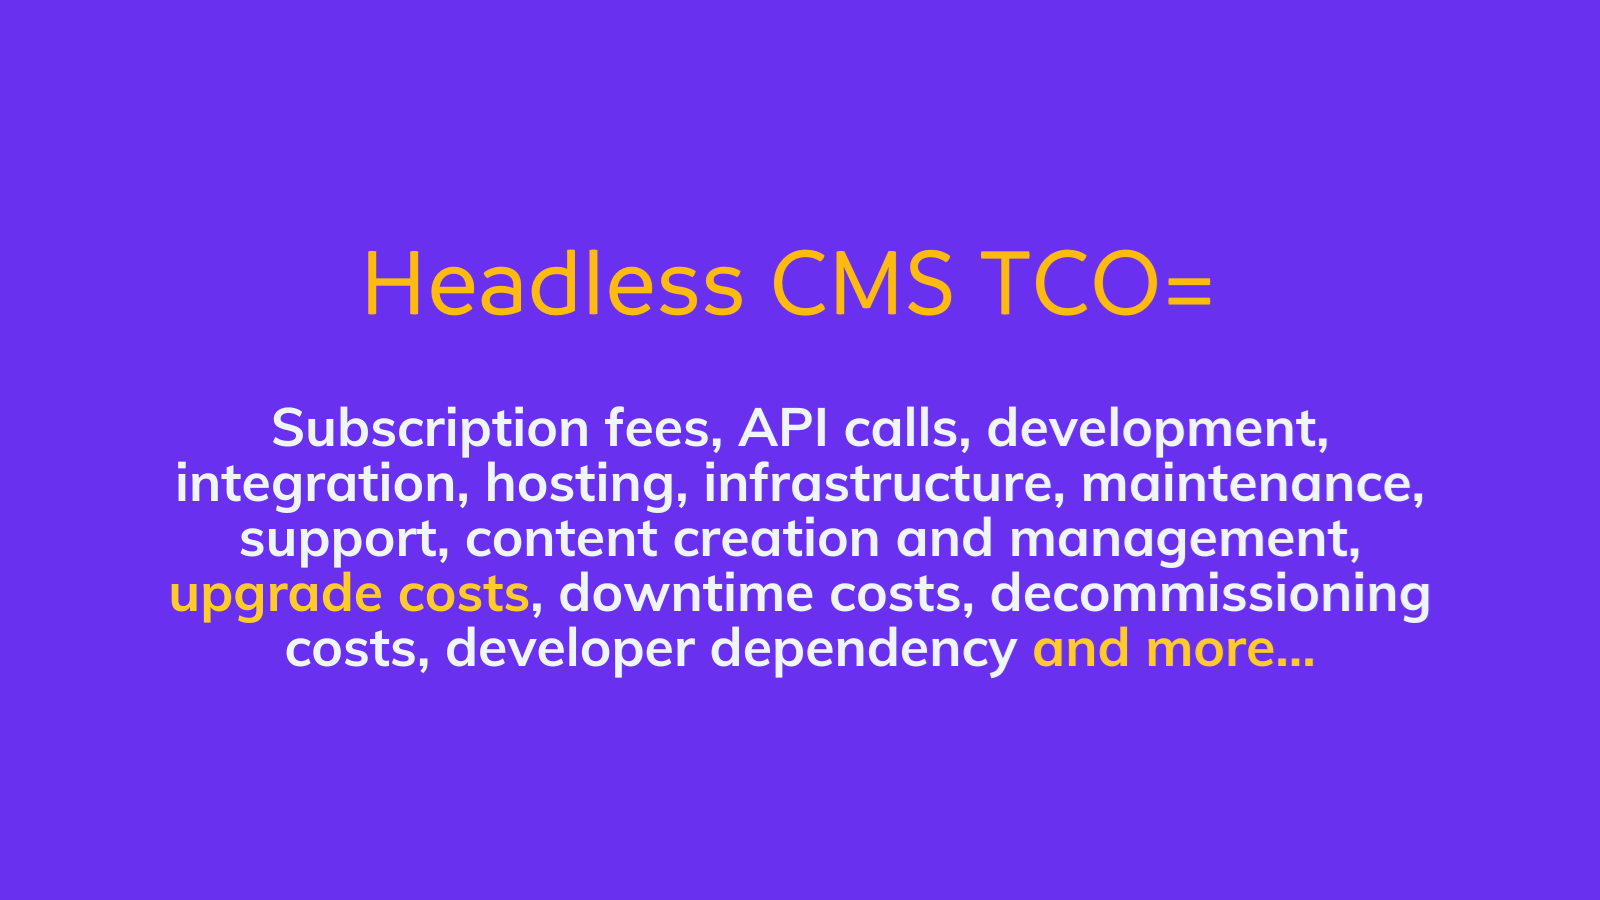 The TCO of Headless CMS